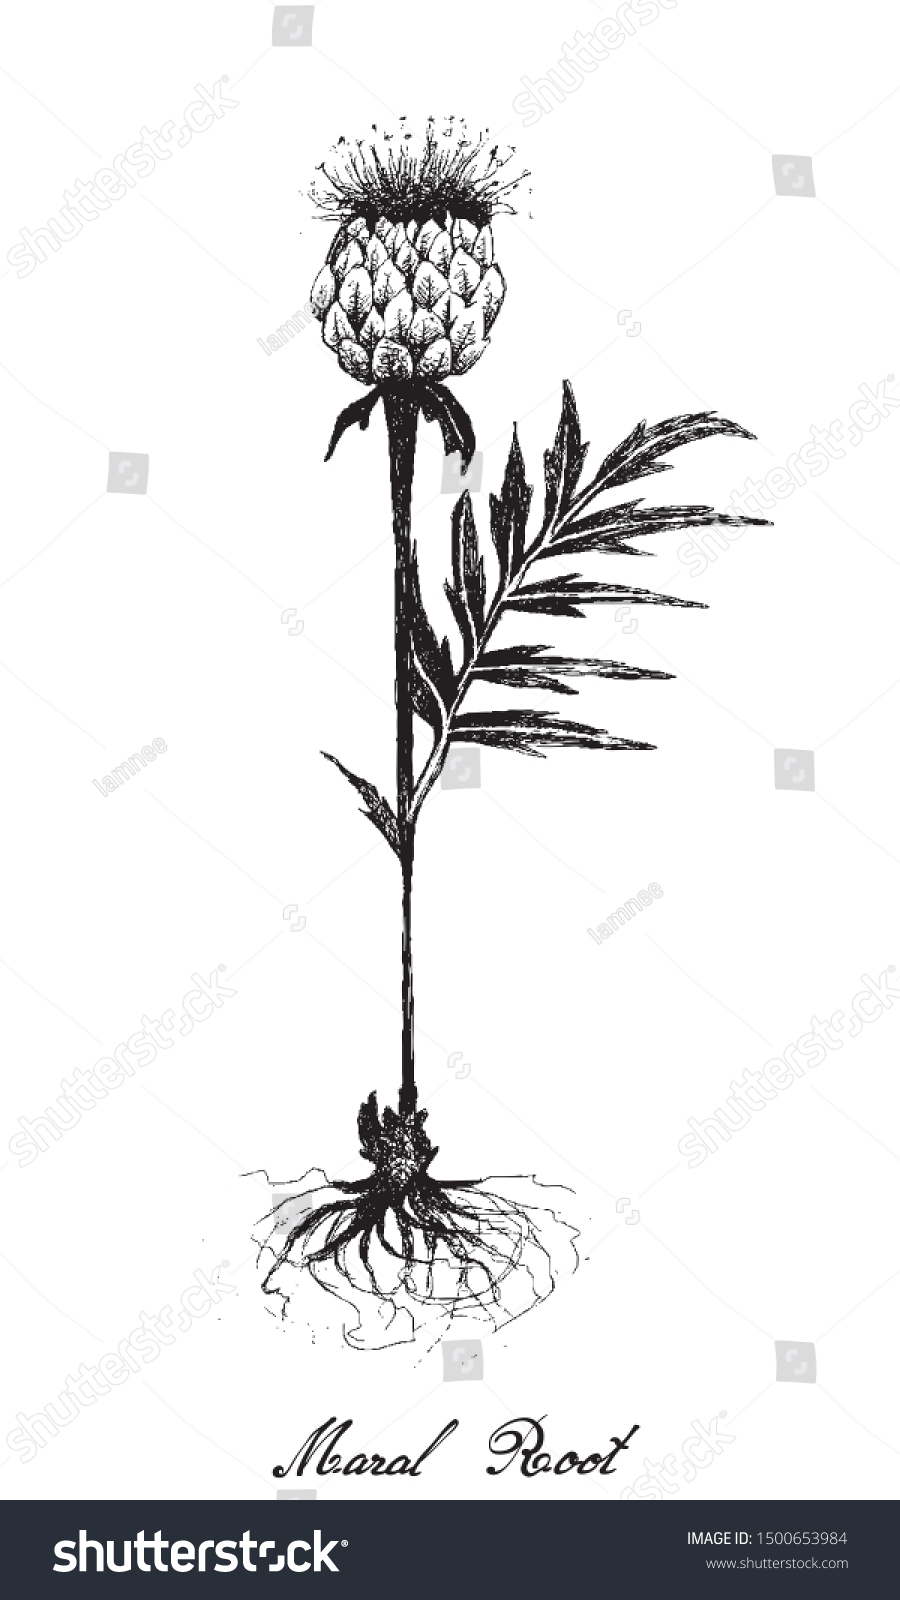 SVG of Herbal Flower and Plant, Hand Drawn Illustration of Rhaponticum Carthamoides or Maral Root Plant, Used in Alternative and Folk Medicine. 
 svg